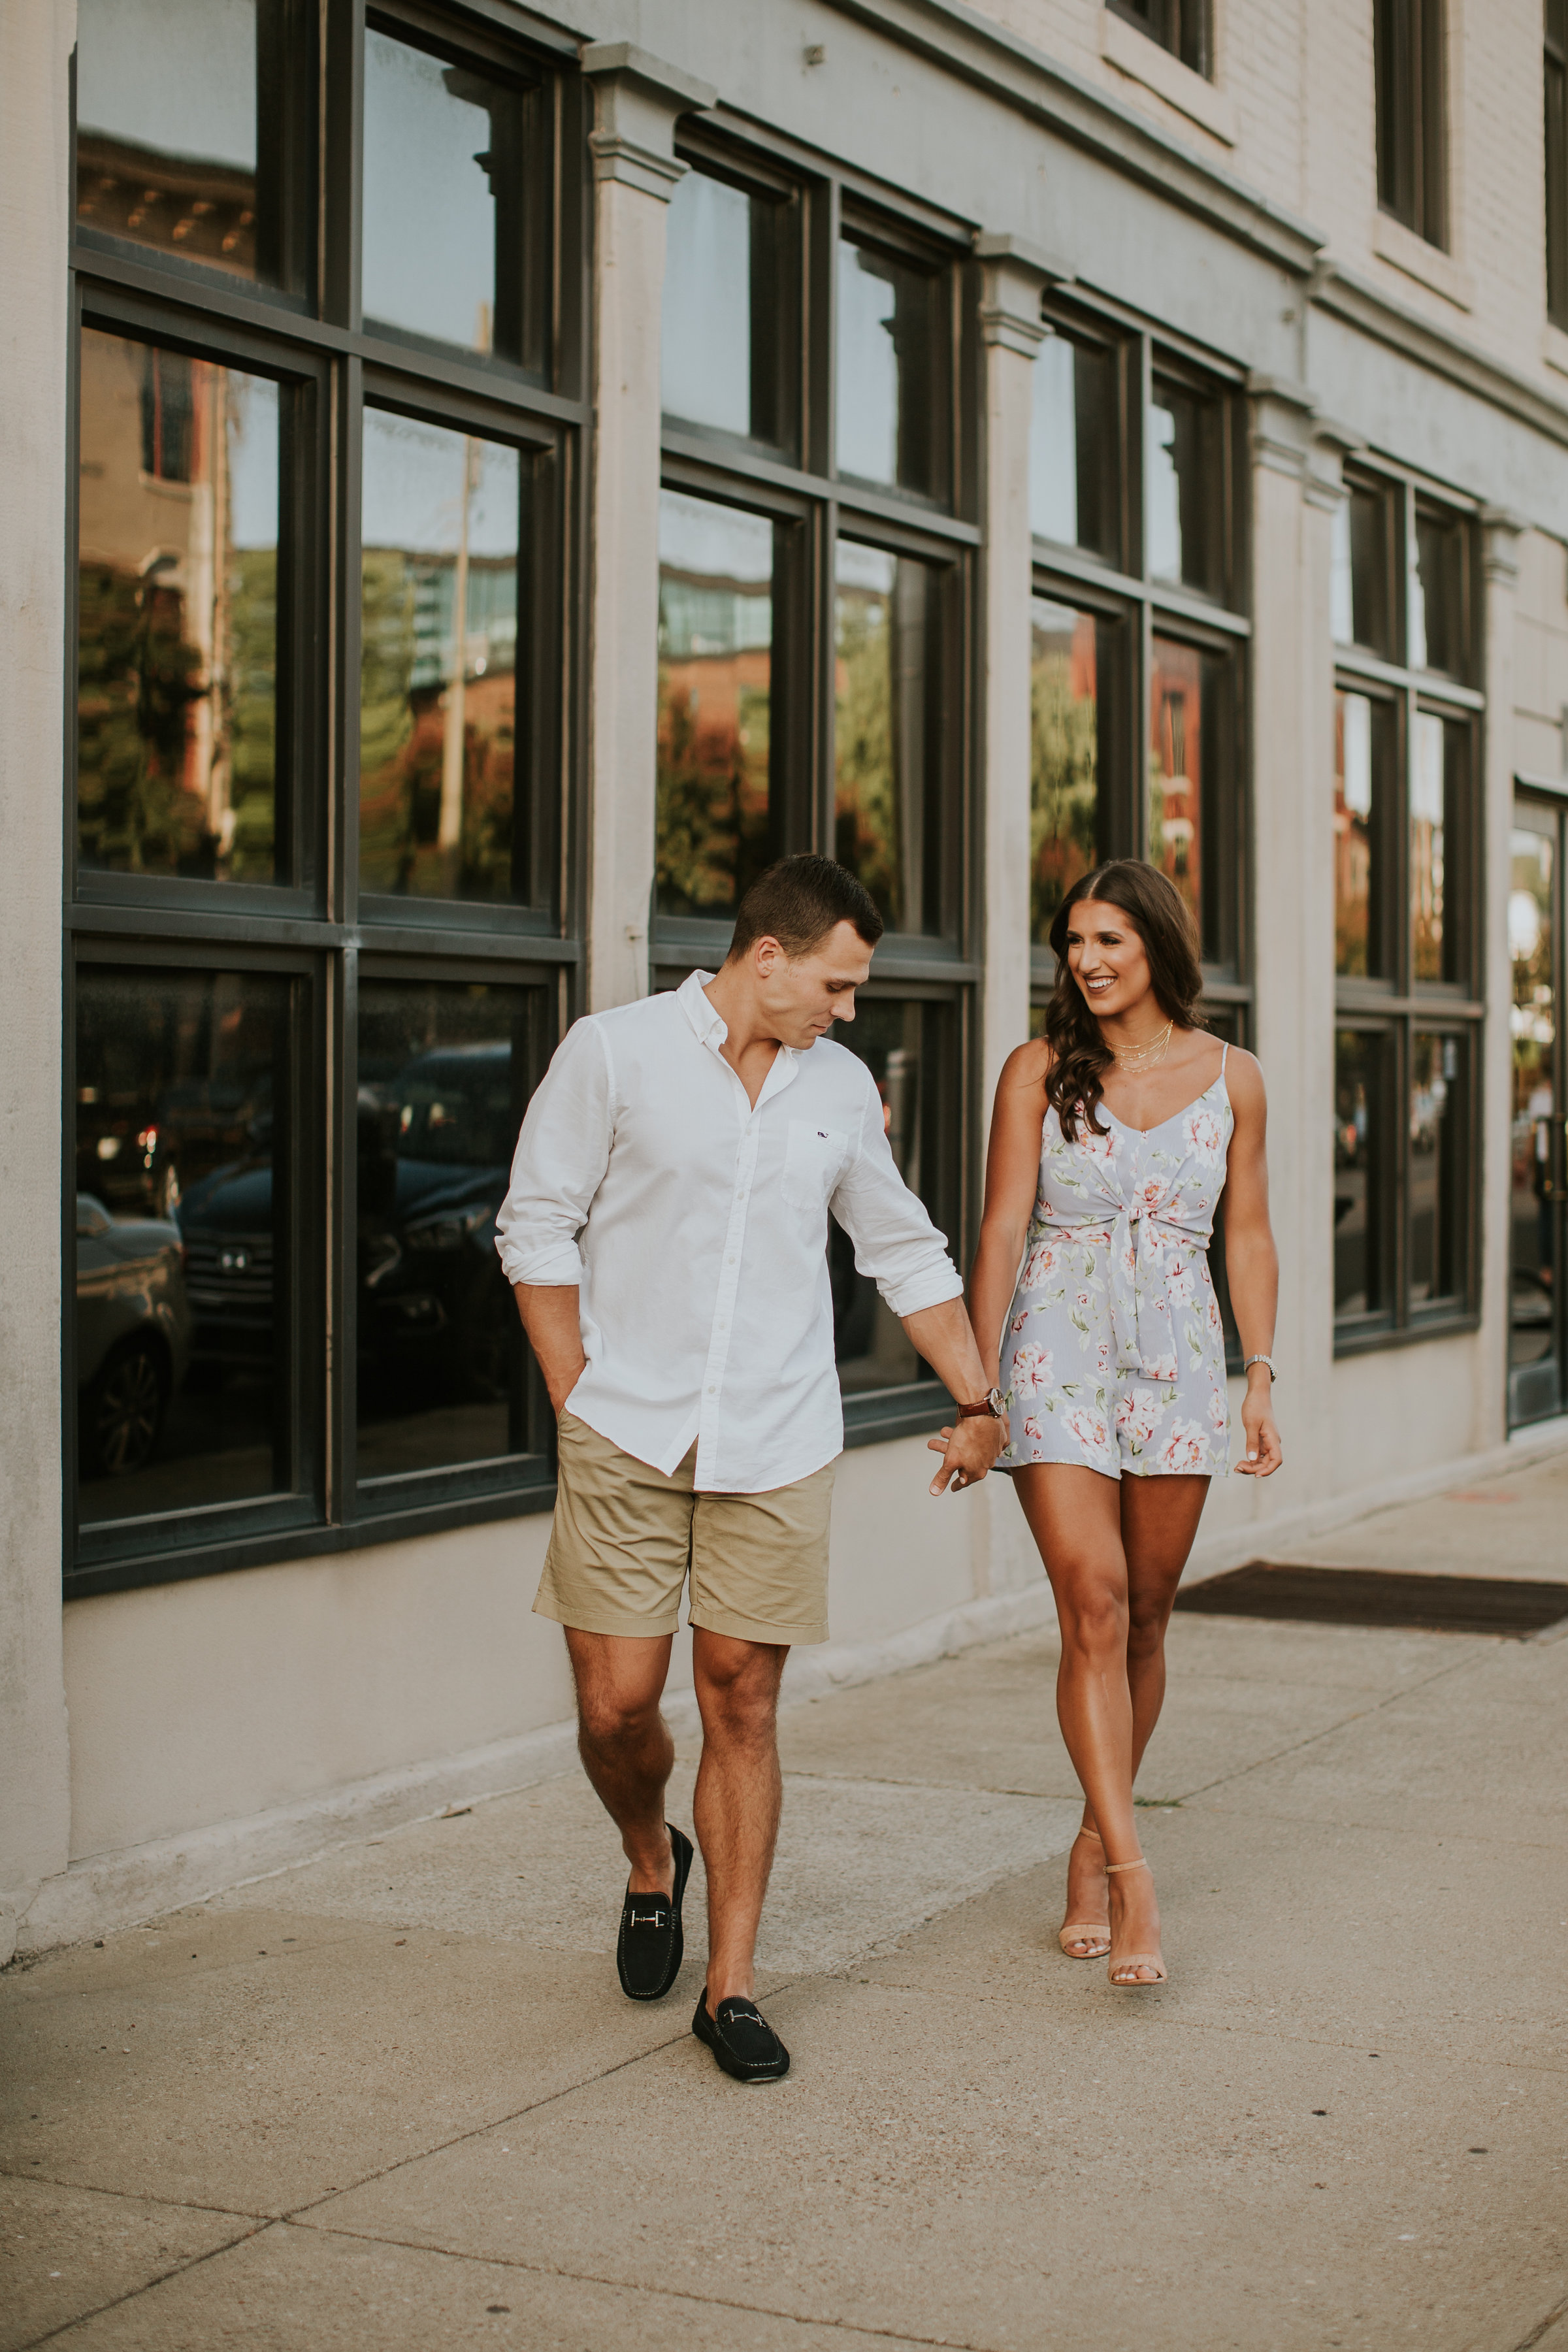 lilac floral romper, couples session, mens style, mens fashion, summer men fashion, couples style, couples goals, grace wainwright wedding, a southern drawl engagement session, our engagement session, grace wainwright engagement, a southern drawl wedding, grace white engagement, grace white wedding, jordan white engagement, jordan white louisville, jordan white wedding, a southern drawl wedding update, grace wainwright husband, grace wainwright fiance, erin trimble photography, couples shoot, couples engagement session, fall wedding // grace wainwright a southern drawl